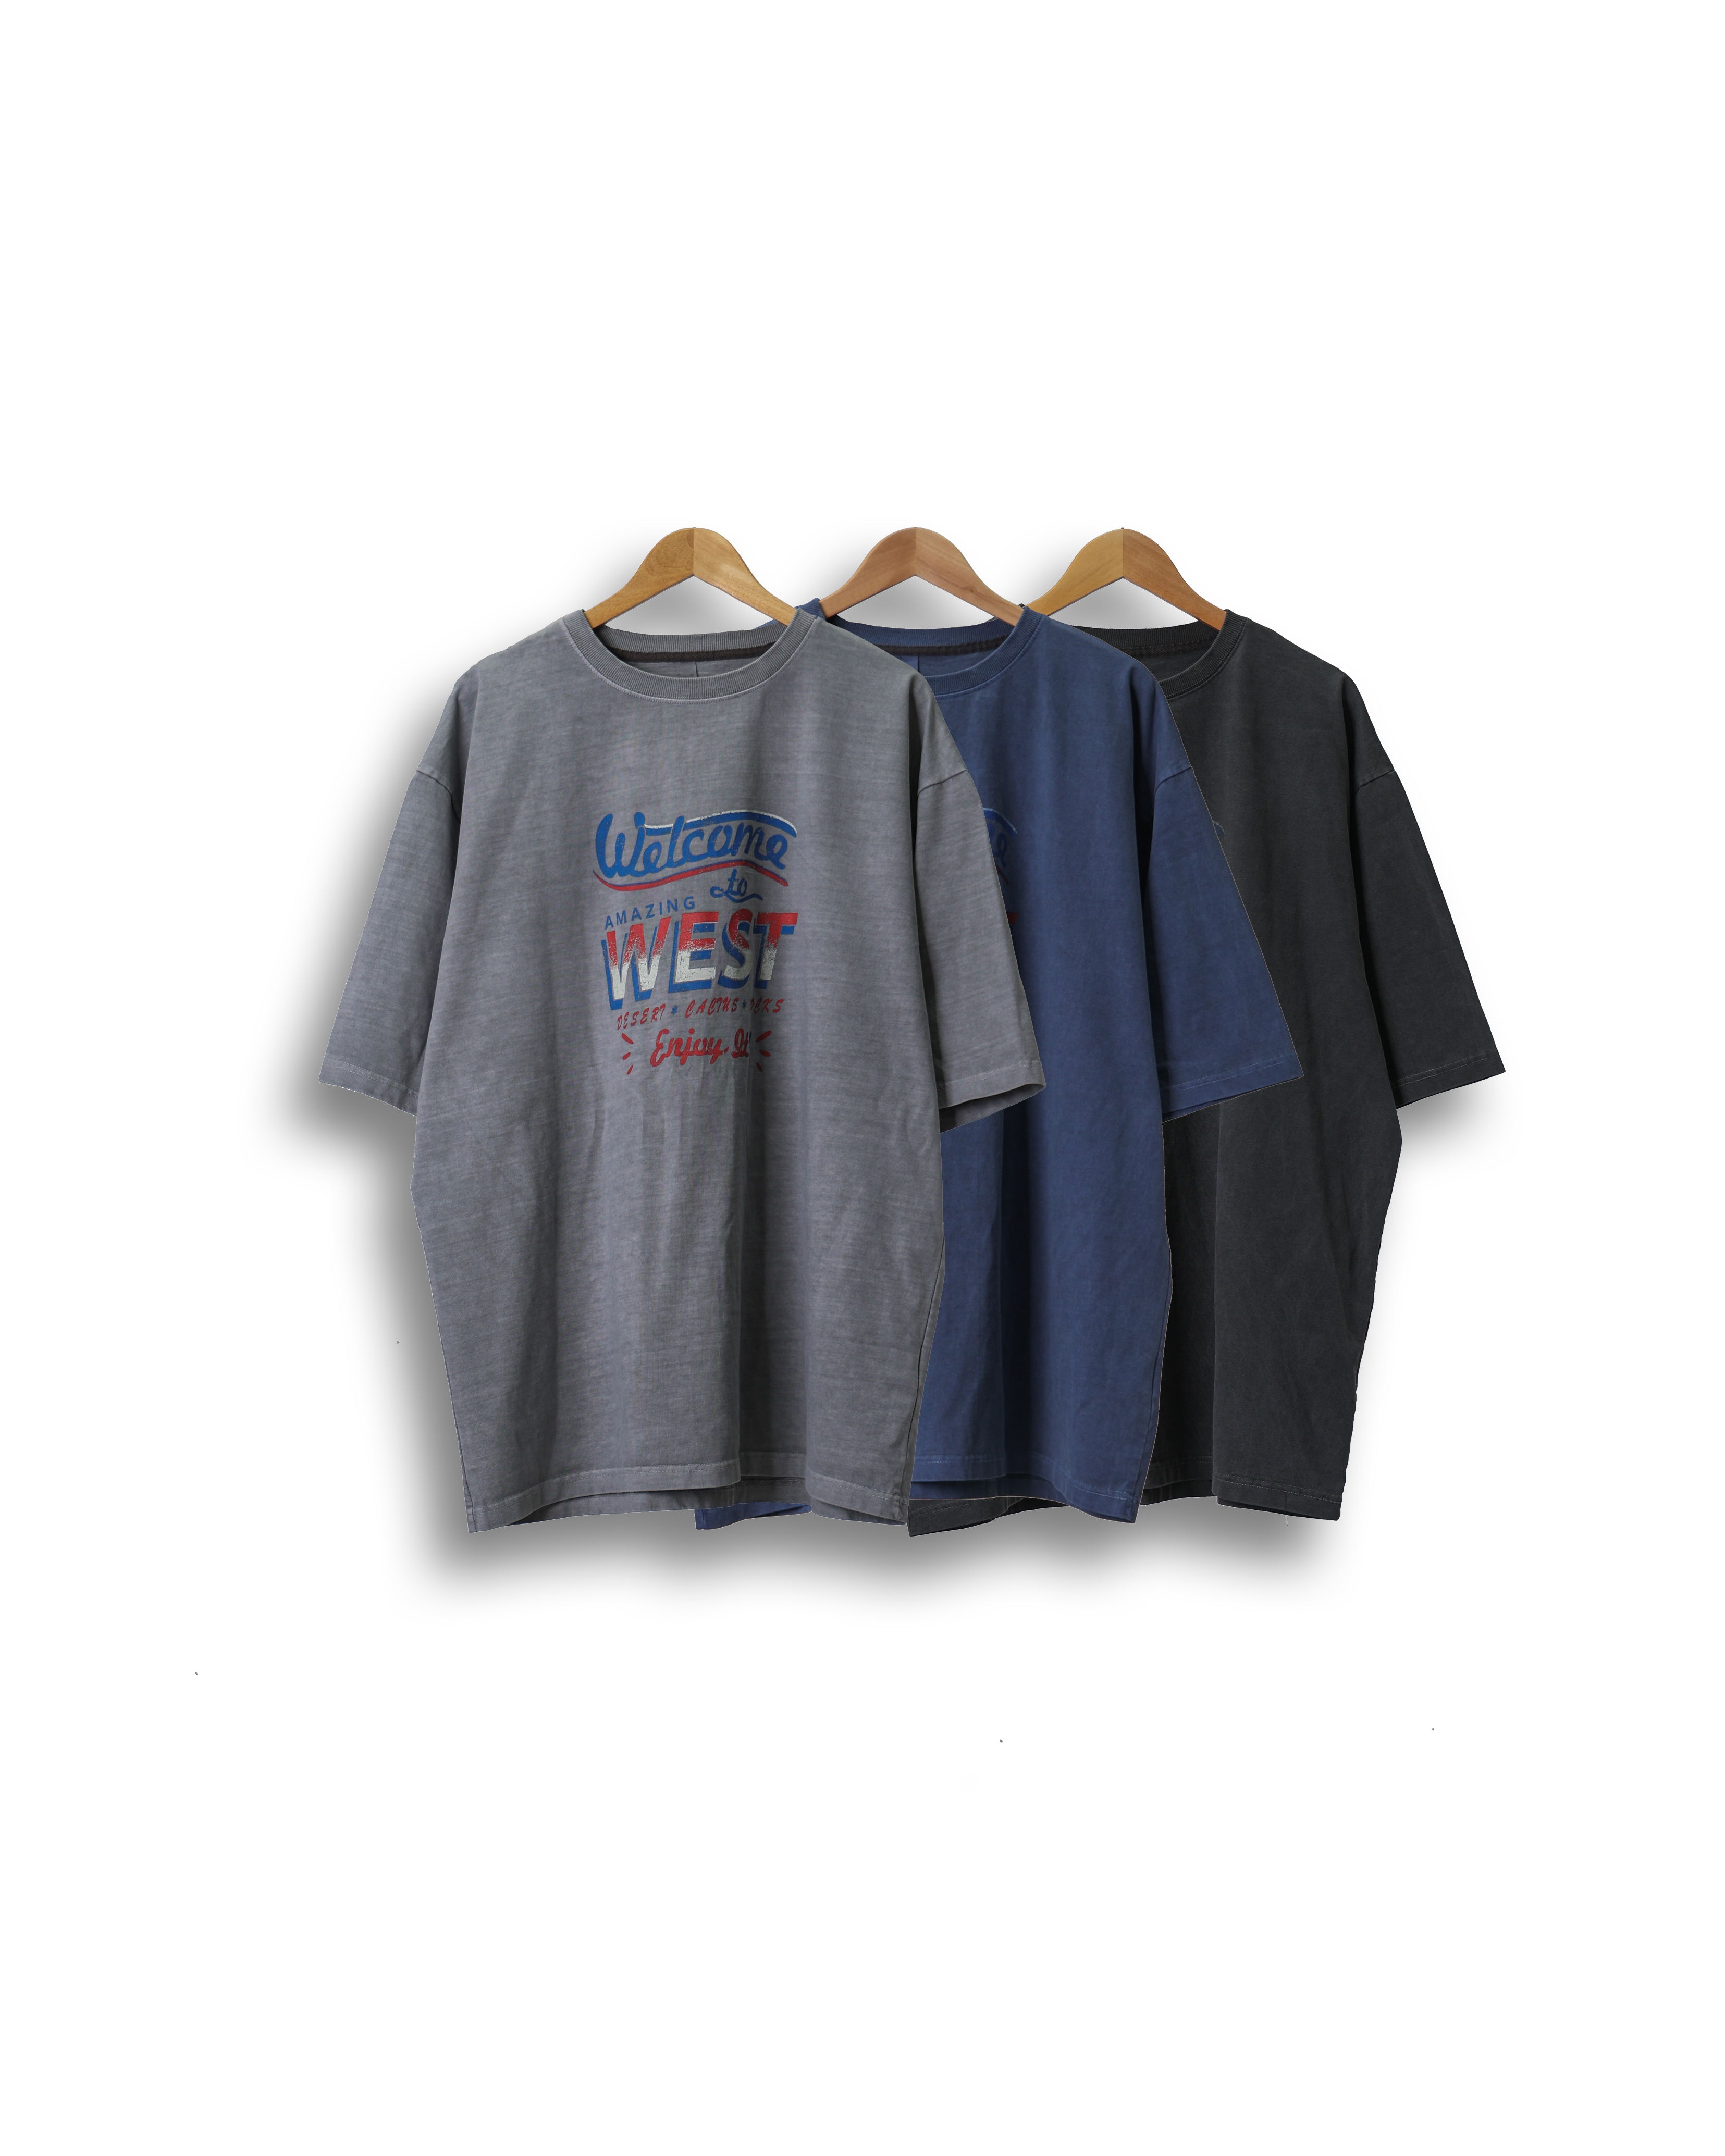 OTHER WEST Pigments Vintage T Shirts (Charcoal/Navy/Light Gray) - 4차 리오더 (6/14 배송예정)